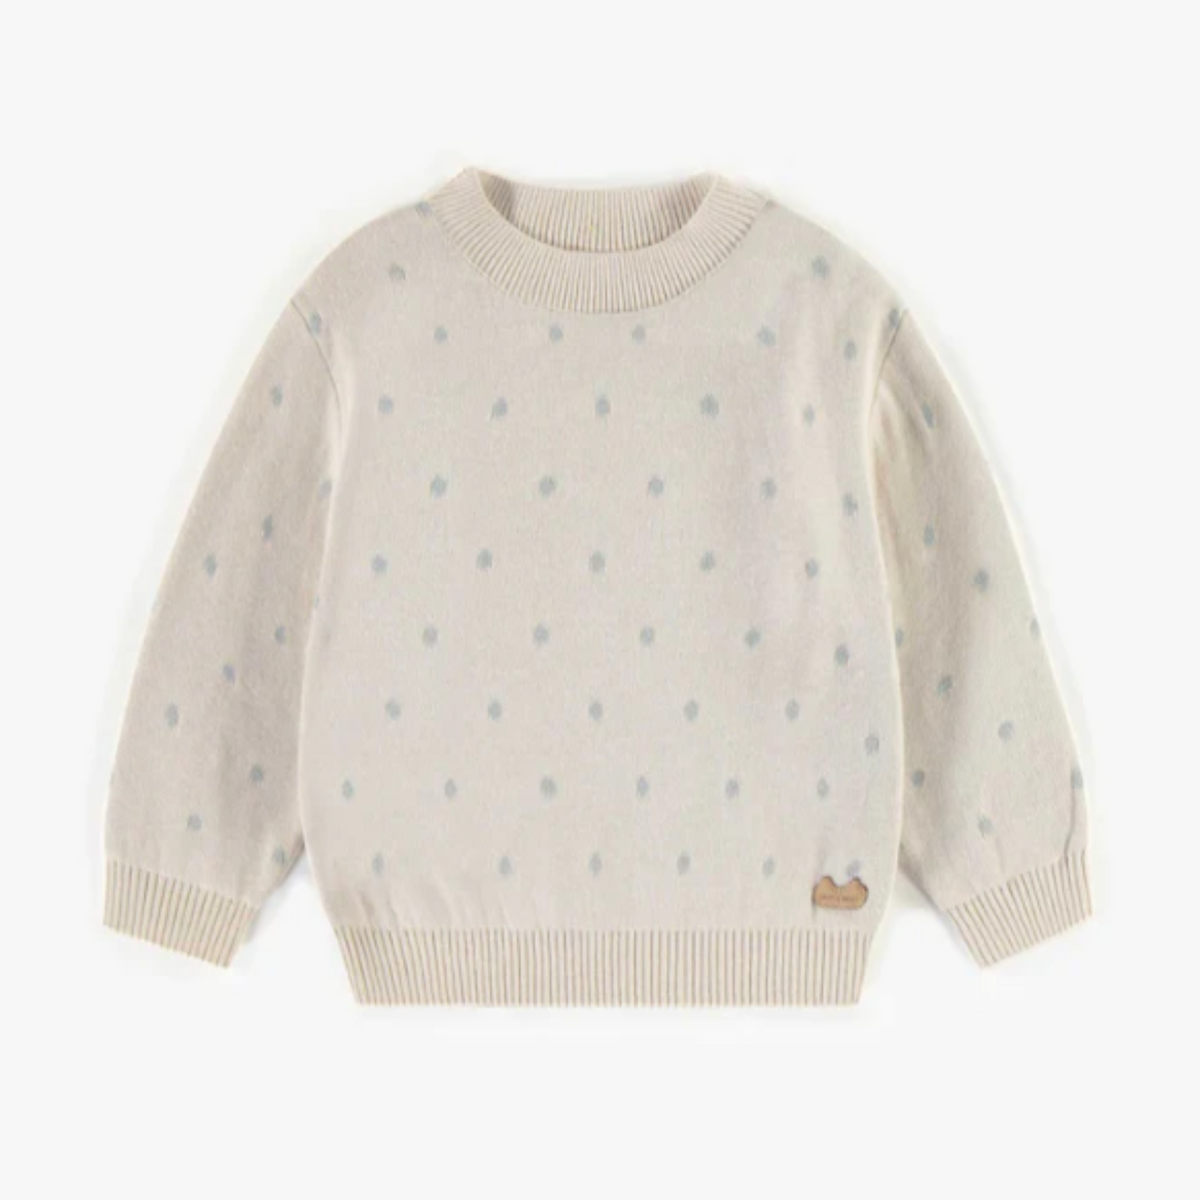 Cream patterned sweater with blue polka dots, newborn